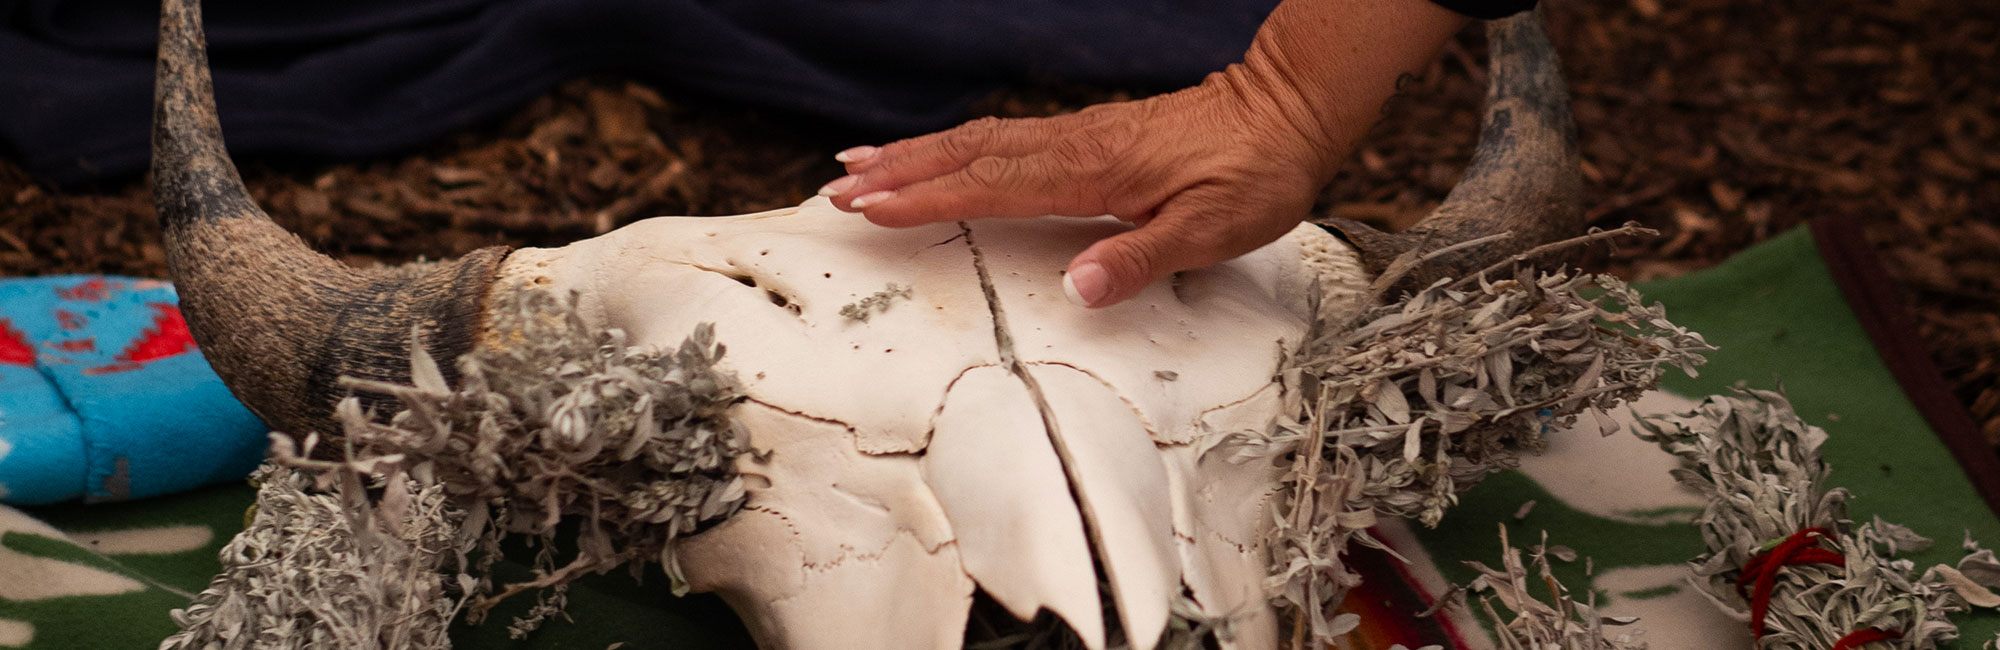 An Indigenous person's hand hovering over the skull of a buffalo